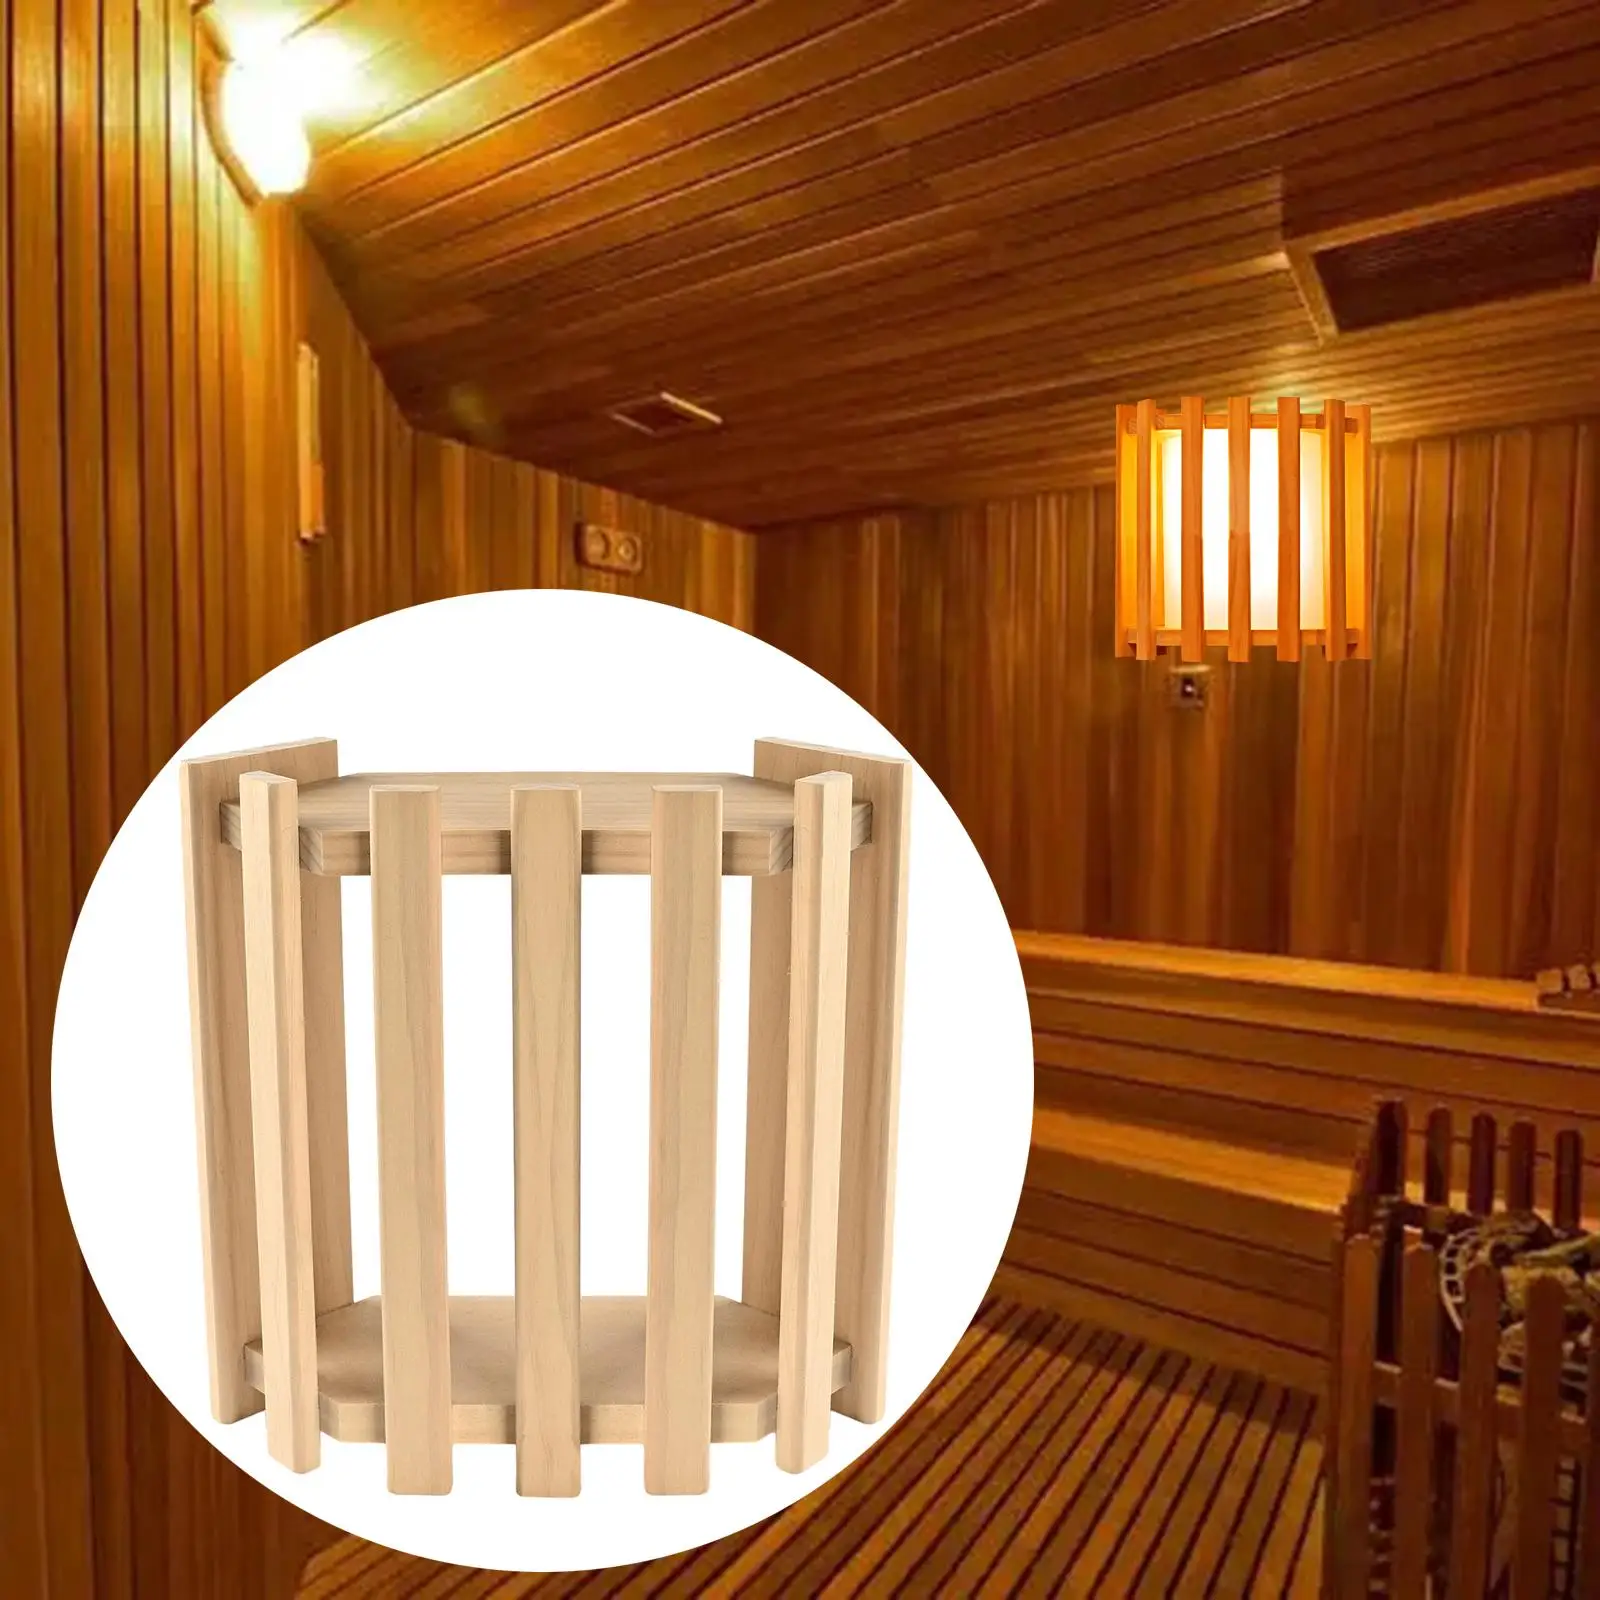 Sauna Room Lamp Shade Retro Decor Lamp Cover Decor Steam Room Accessories Wooden Steam Room Lampshade Cover for Home Decoration